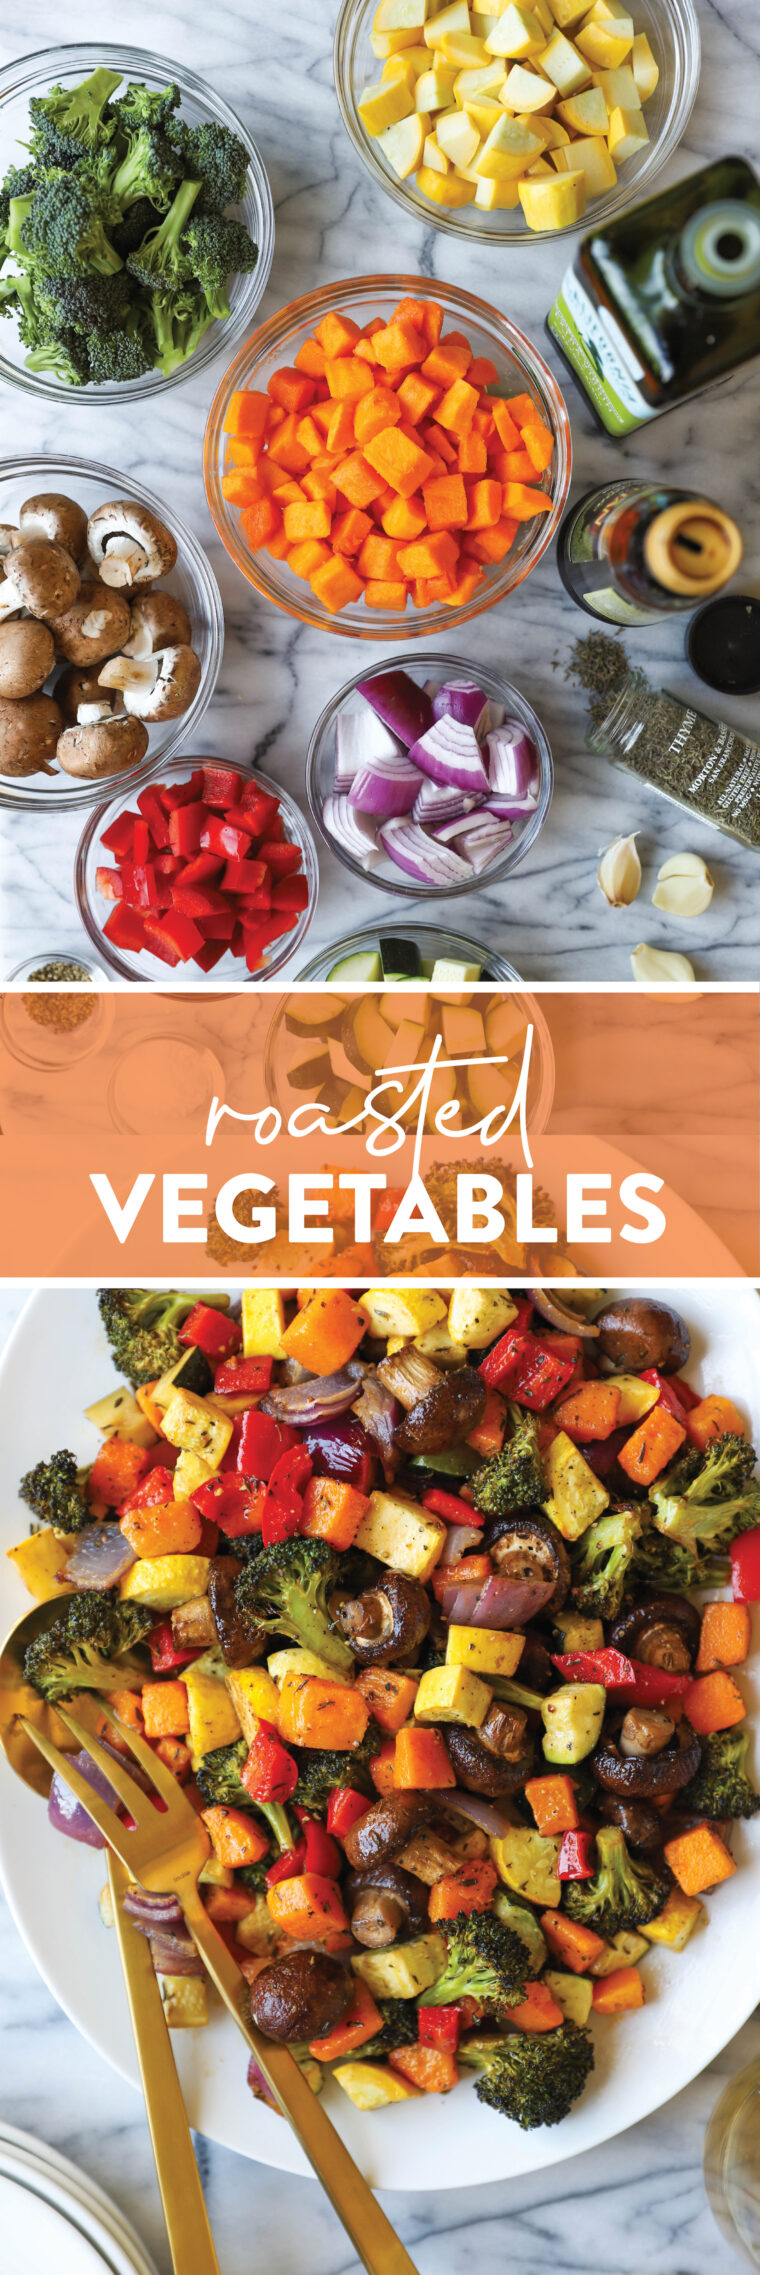 Roasted Vegetables - The easiest, simplest, and BEST way to roast vegetables - perfectly tender and packed with so much flavor!